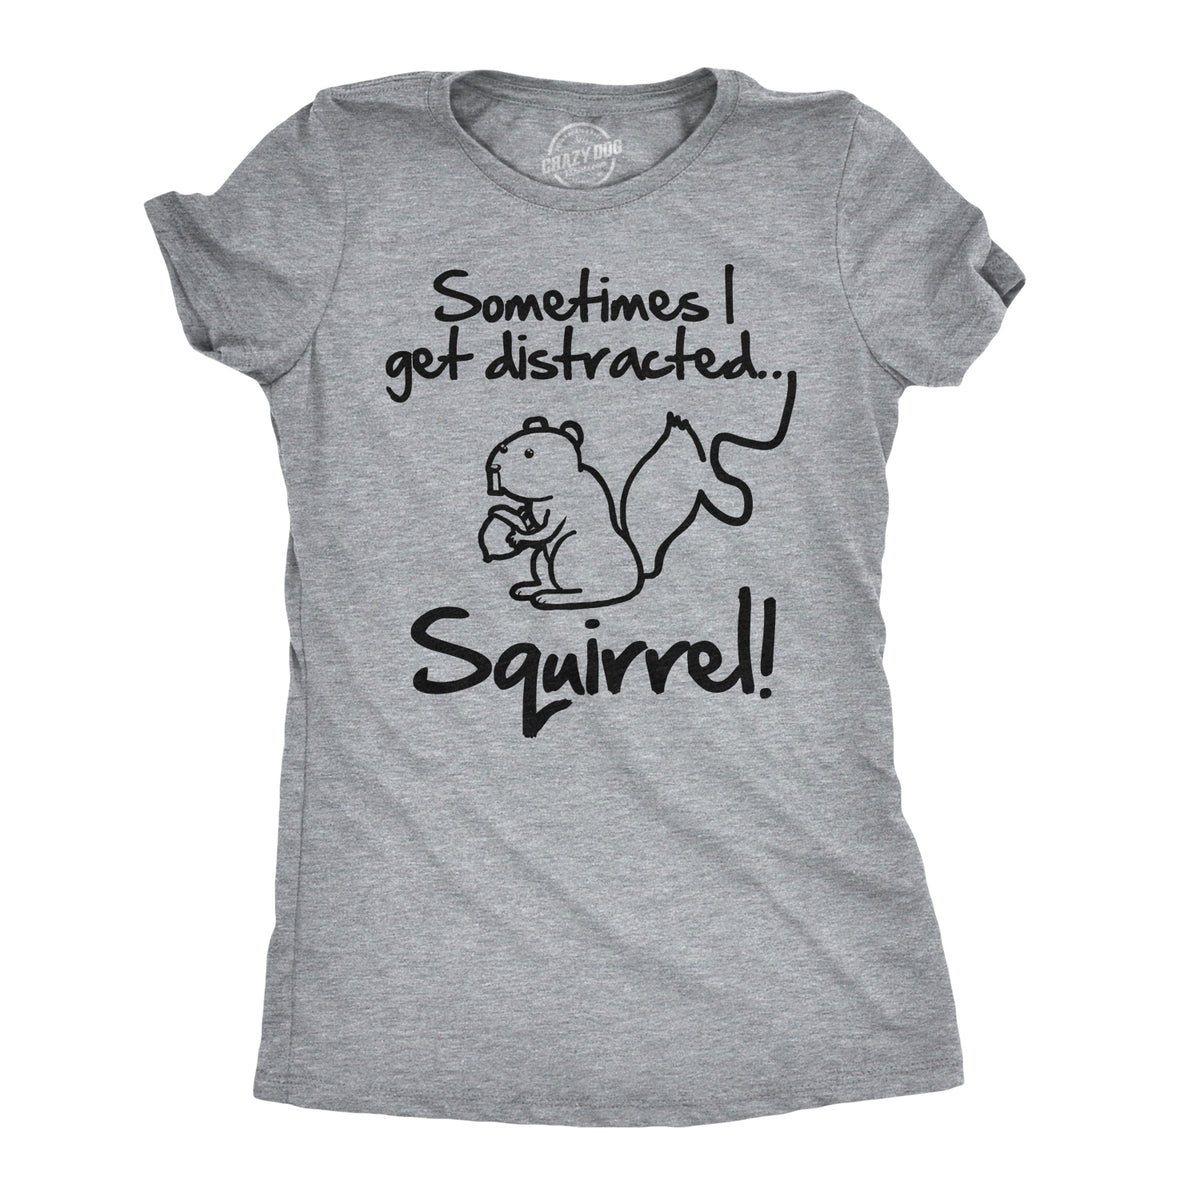 Funny Light Heather Grey - Distracted Sometimes I Get Distracted Womens T Shirt Nerdy Animal Tee